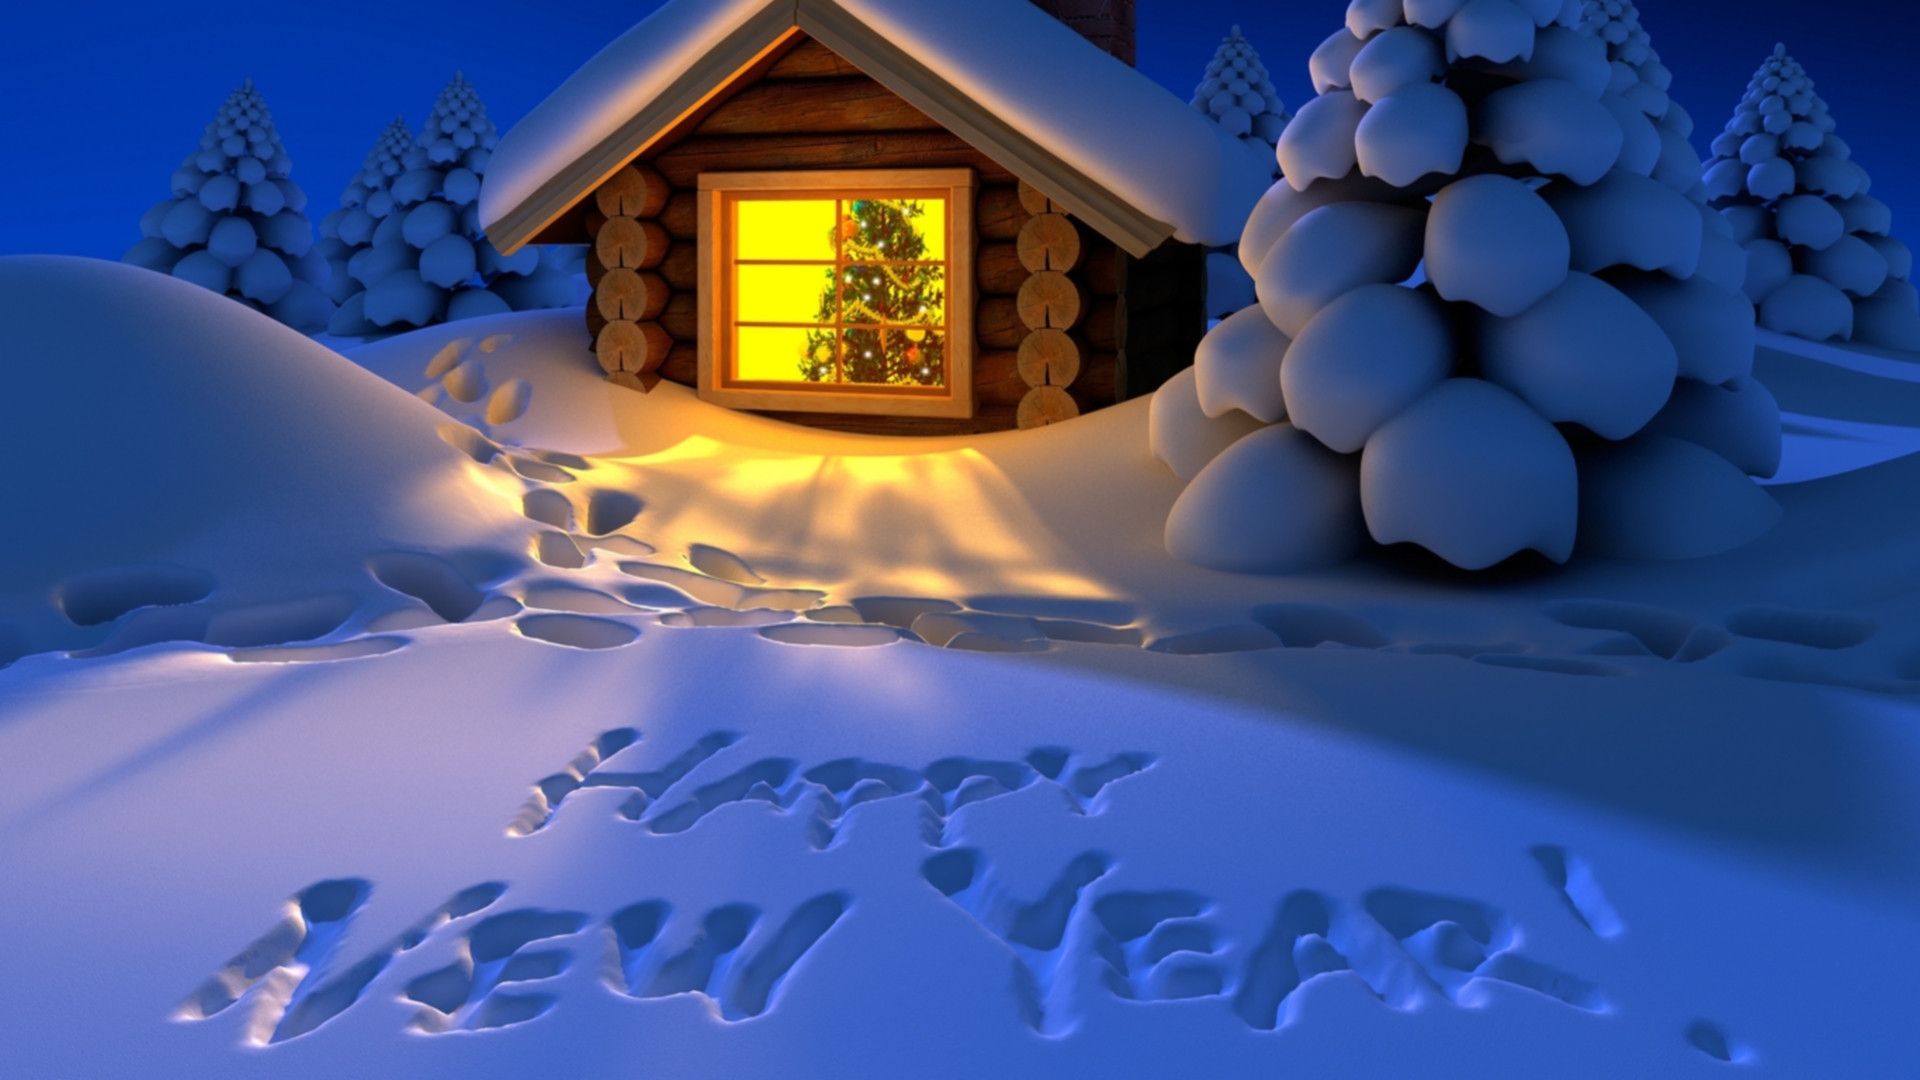 Happy-New-Year-Hd-Wallpapers (8)